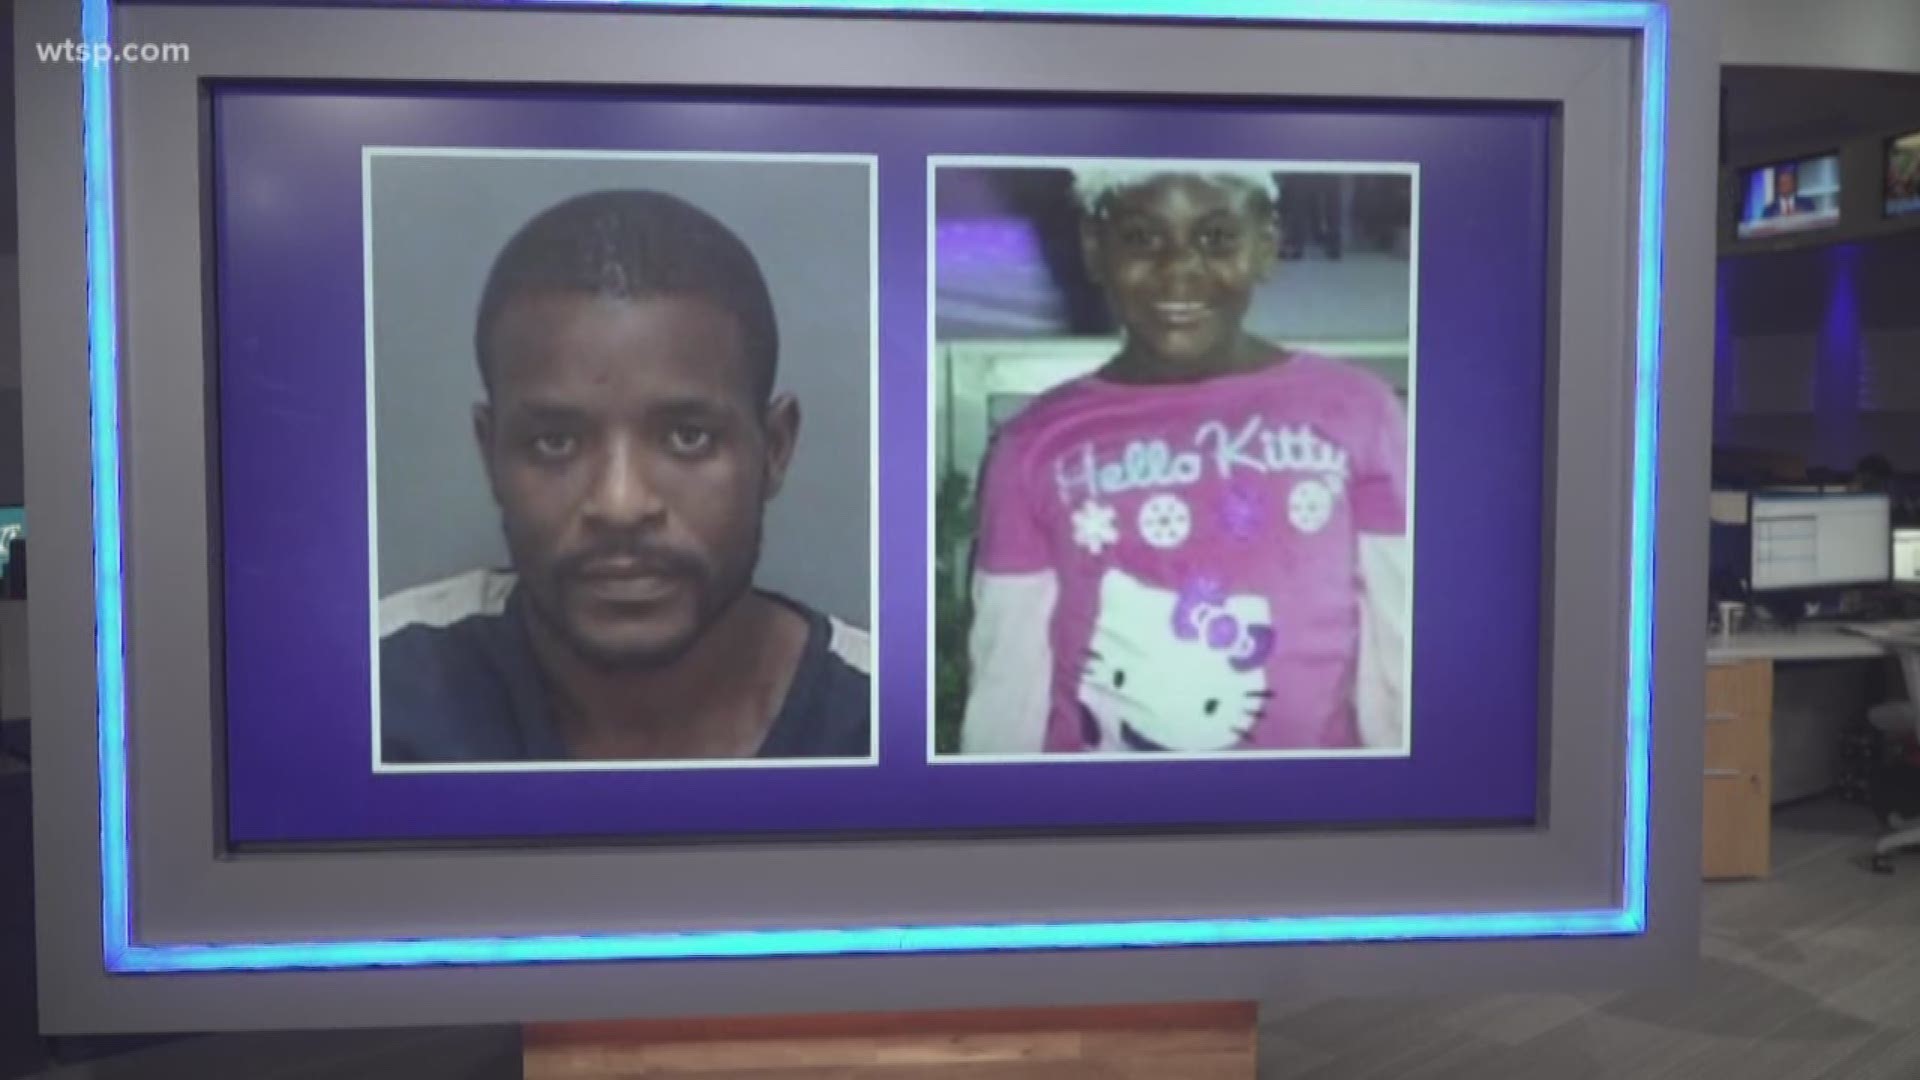 Opening statements and testimony have begun in the Granville Ritchie murder trial. Ritchie is accused of sexually assaulting and murdering 9-year-old Felecia Williams in May 2014. https://on.wtsp.com/2kKb20O